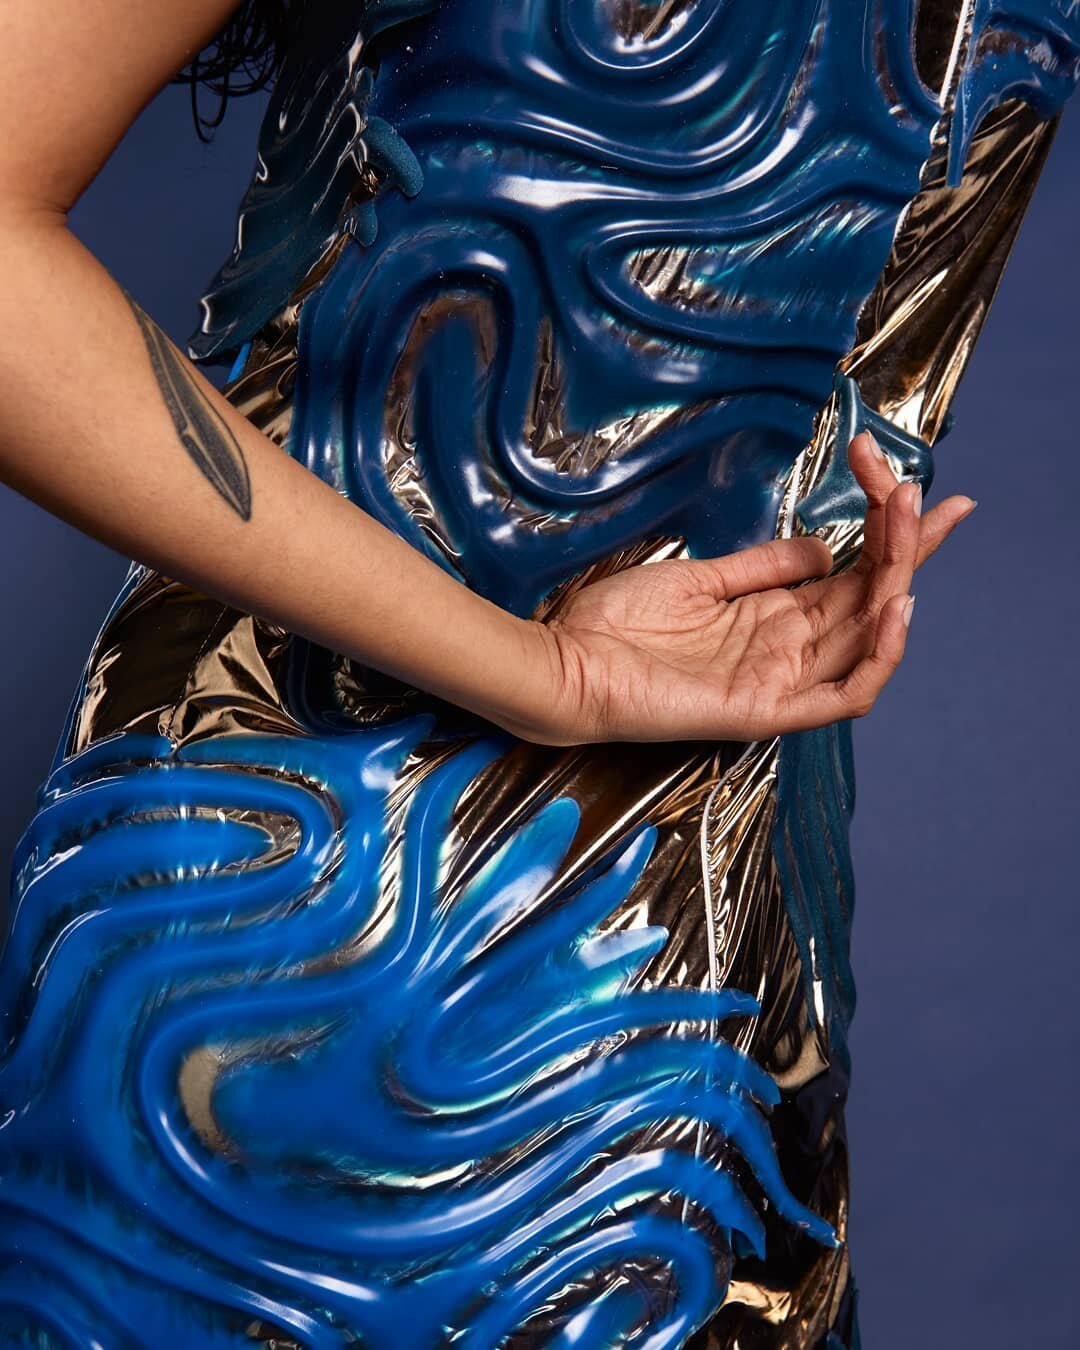 The Sea Dress Detail shot. Molded silicone adhered to metallic film fabric to create a drenched, wet look

photo: @tylerjudson 
model: @tiafafloof
makeup: @maayaneli9 
hair: @tightsaf 
assistant: @katherinediazvillegas 
#fashiondesign #textiledesign 